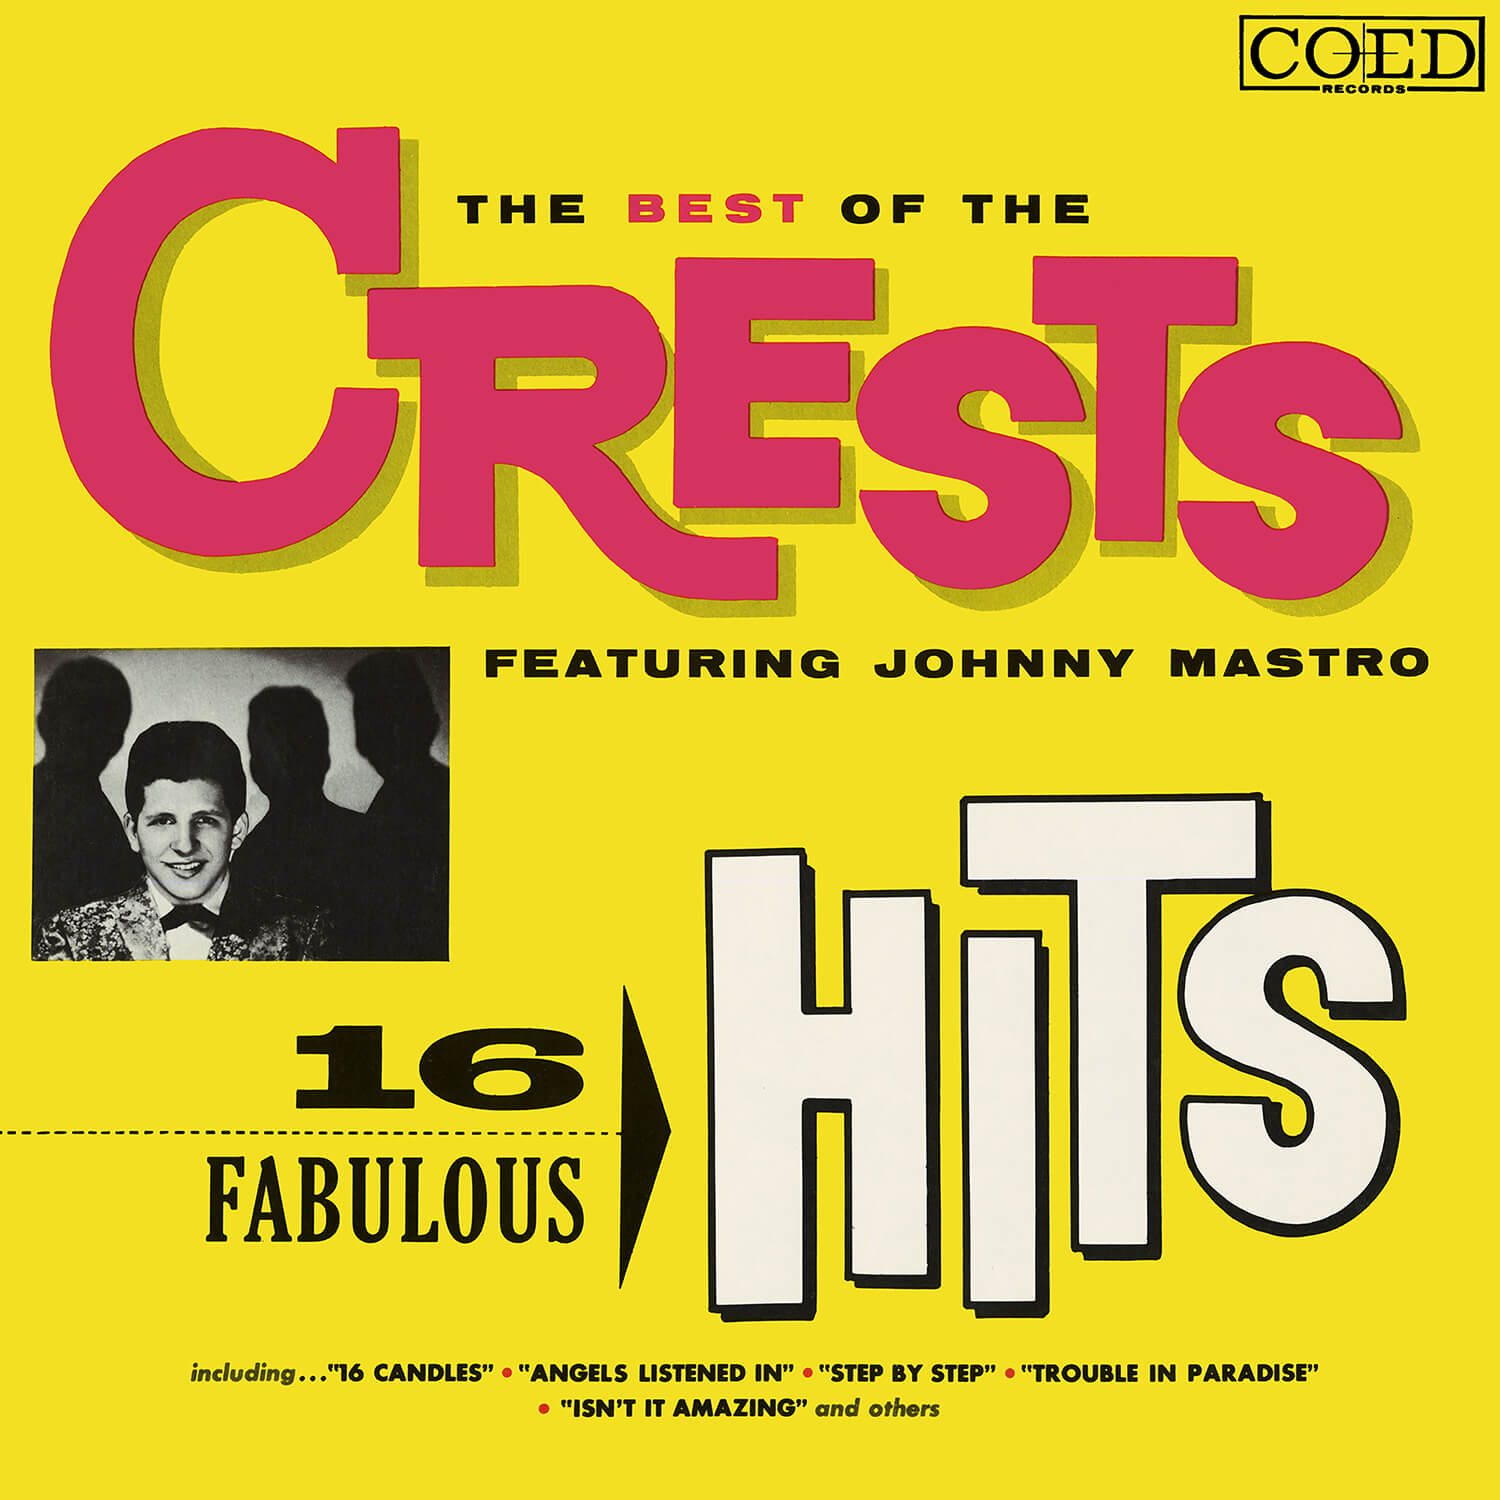 The Best Of The Crests Featuring Johnny Mastro: 16 Fabulous Hits